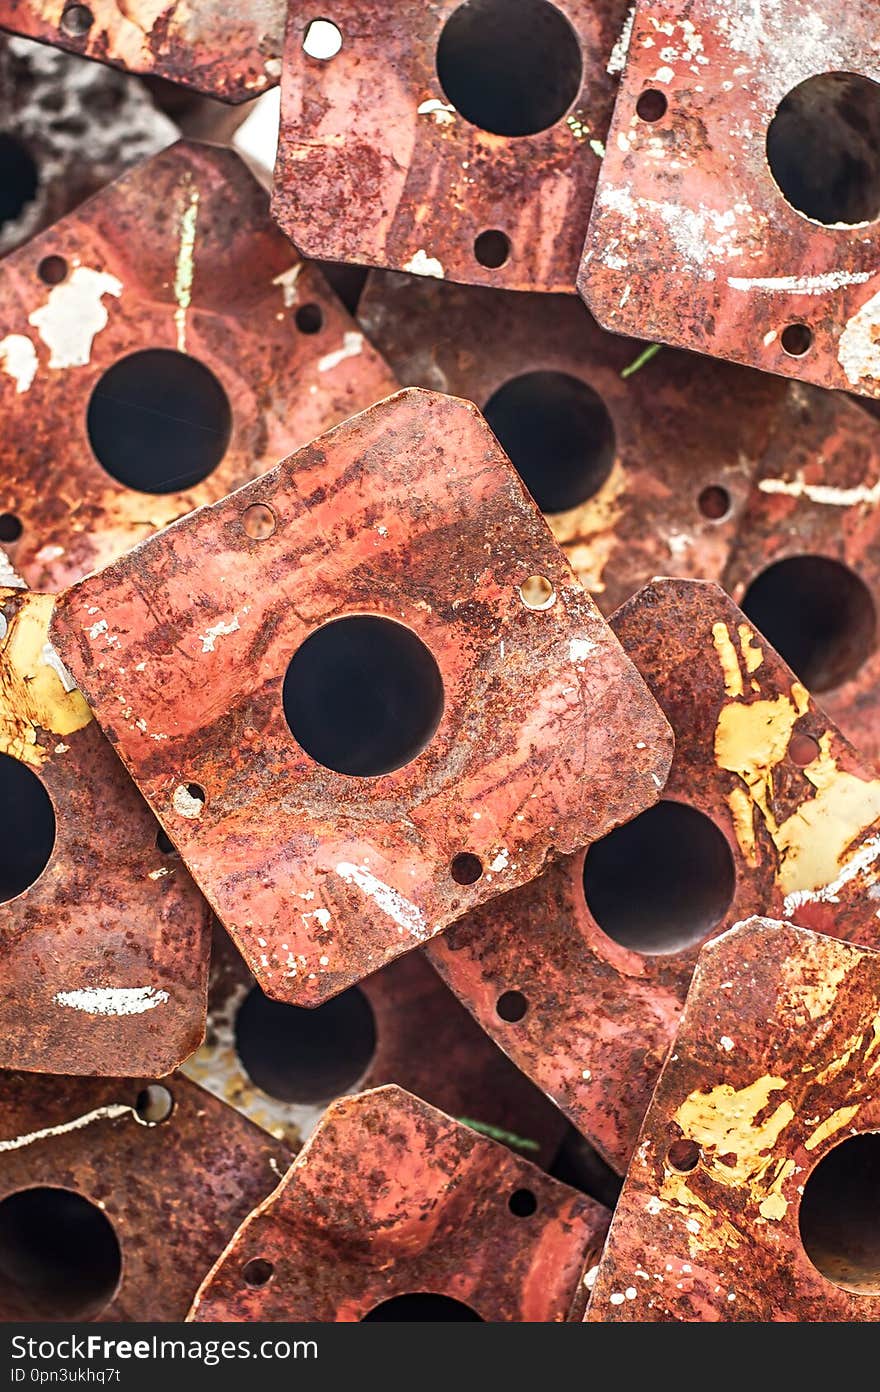 Pile of scrap rusty grunge metal plates covered in rust. Close up